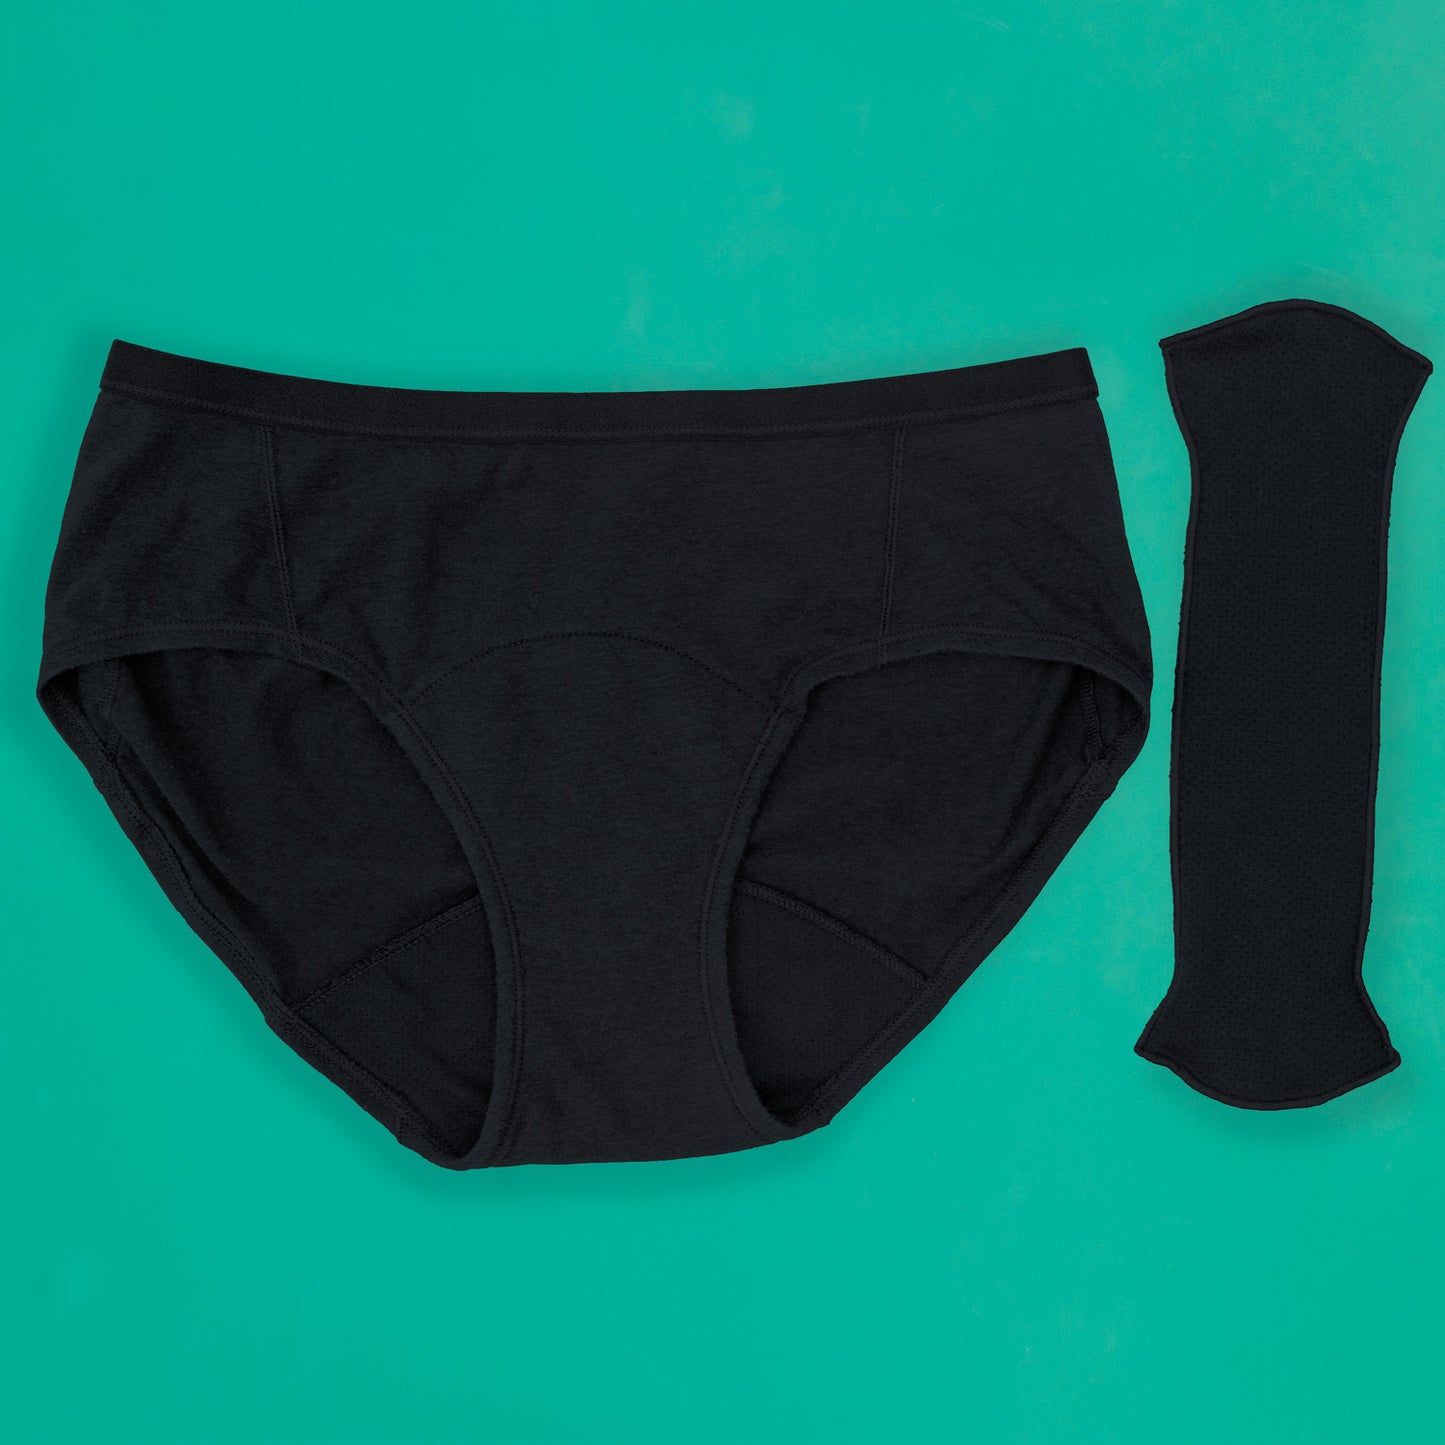 Aisle leakproof hipster period underwear with the booster